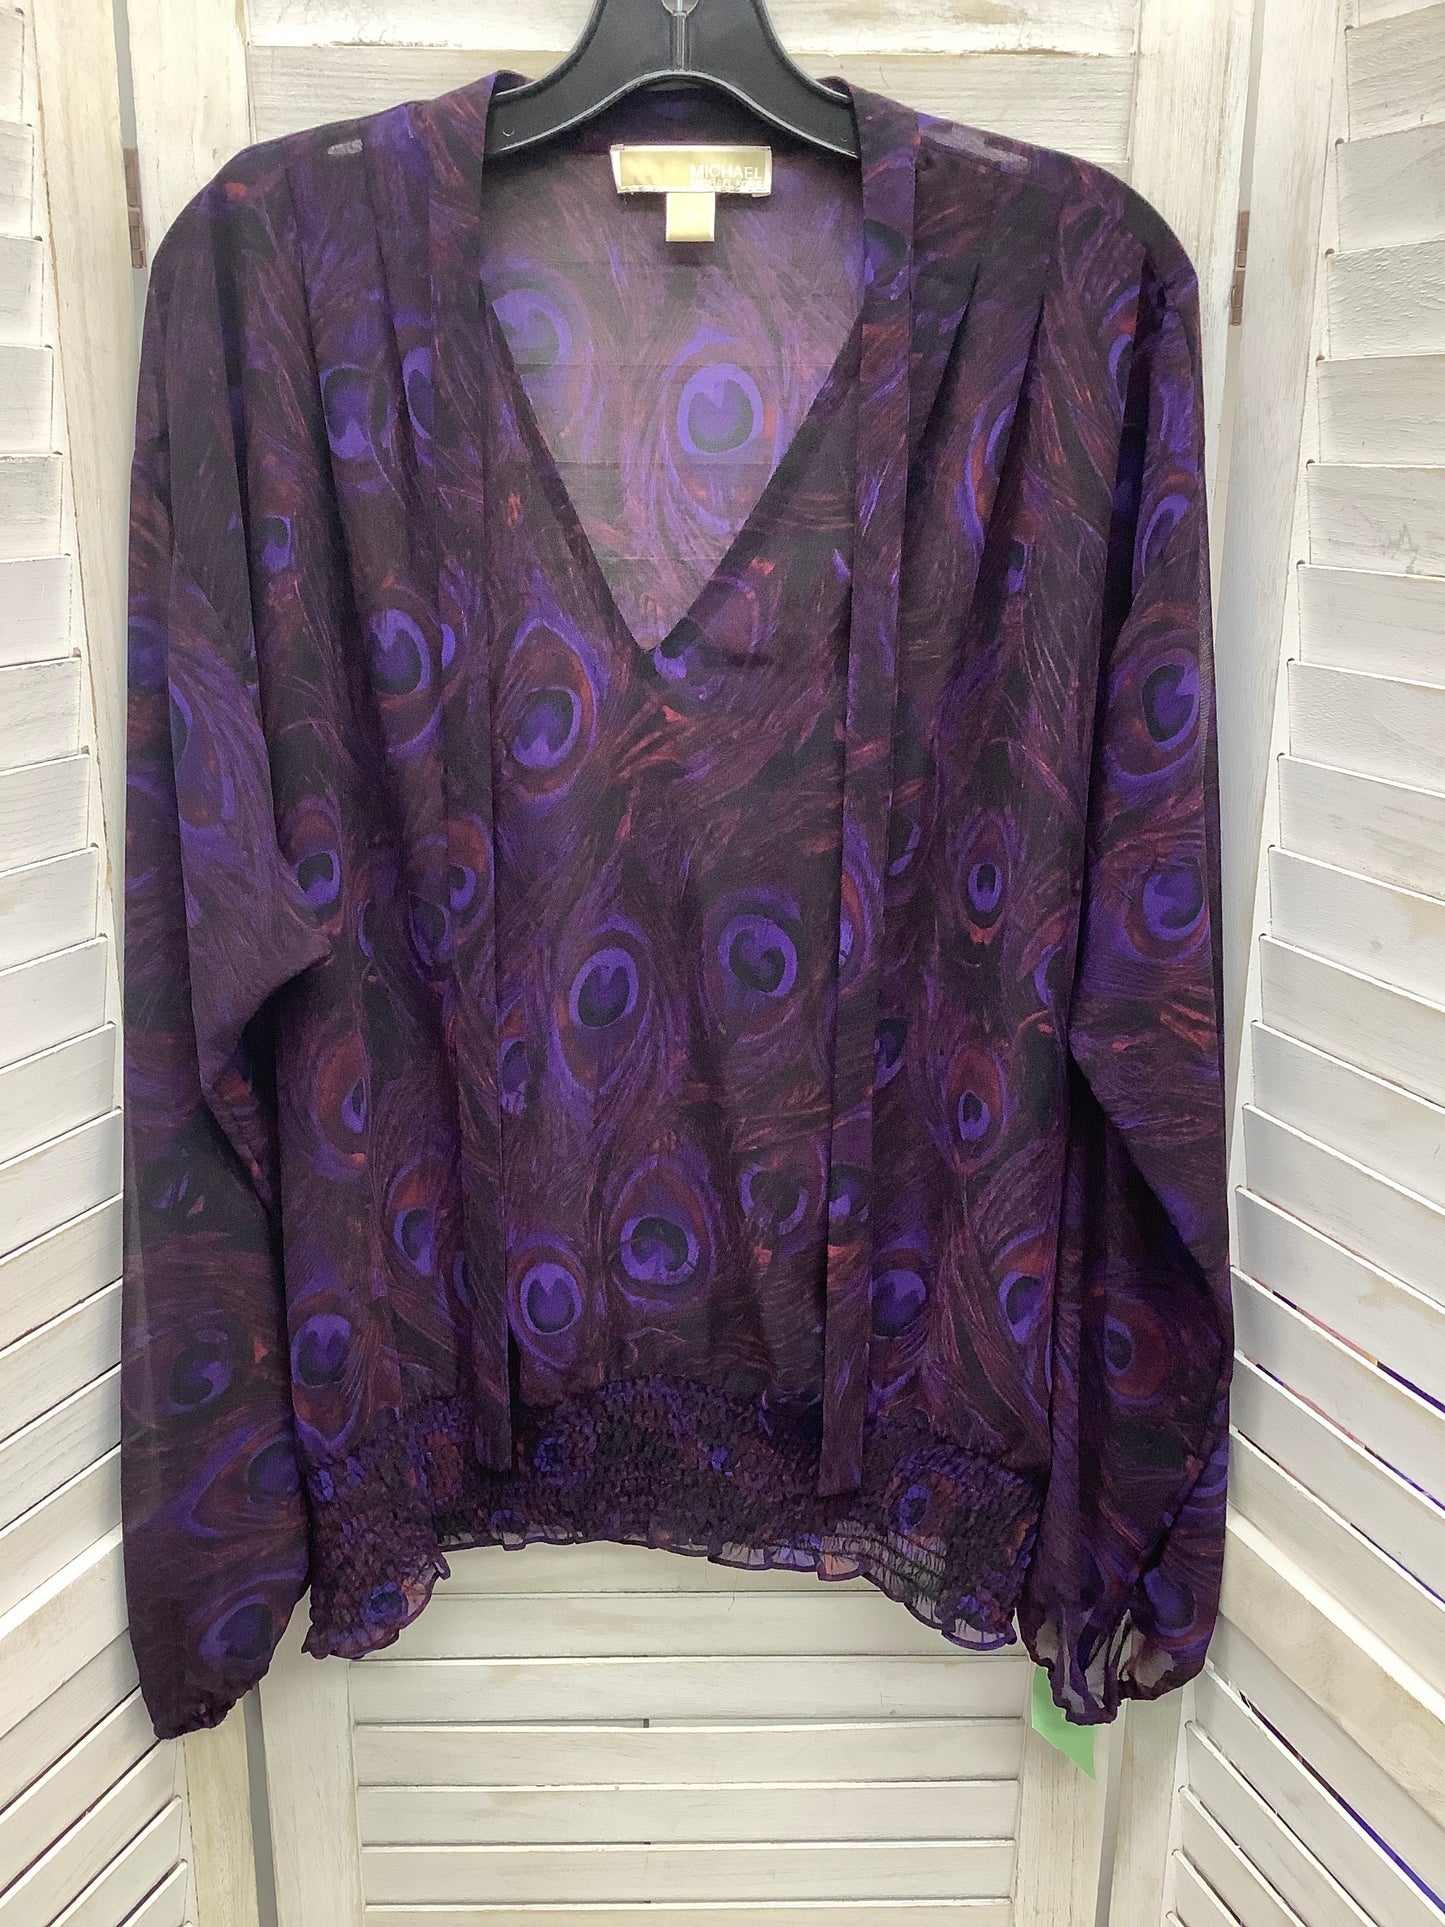 Multi-colored Top Long Sleeve Michael Kors, Size Xl